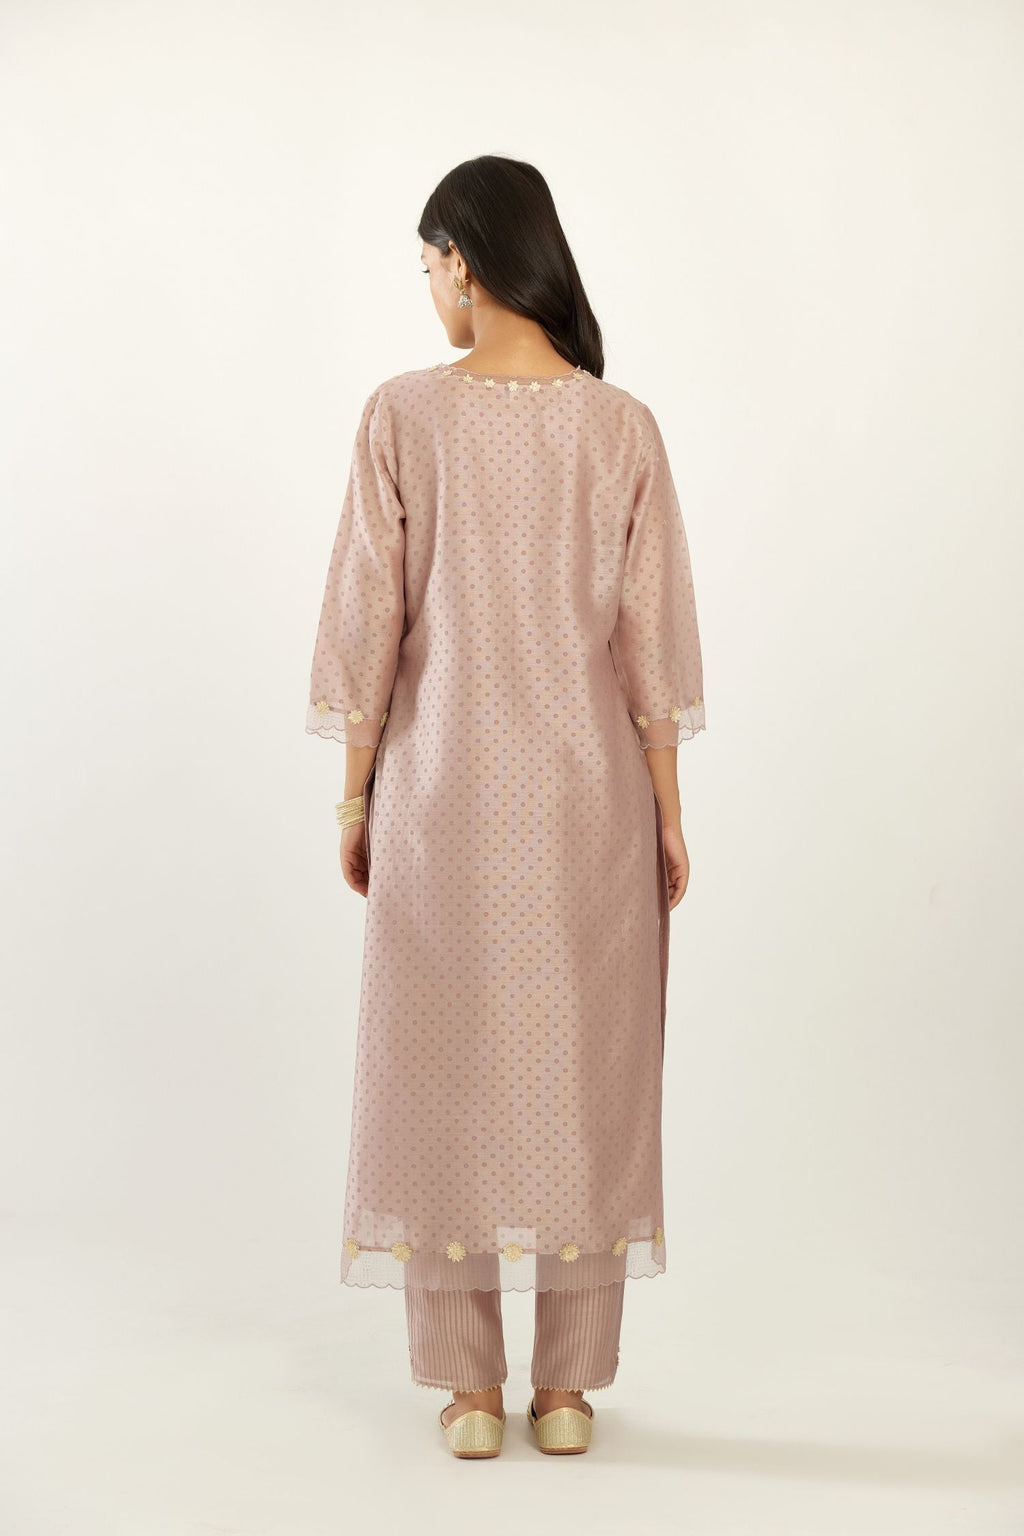 Lilac silk chanderi hand block printed straight kurta set, highlighted with organza and gota embroidered flower at edges